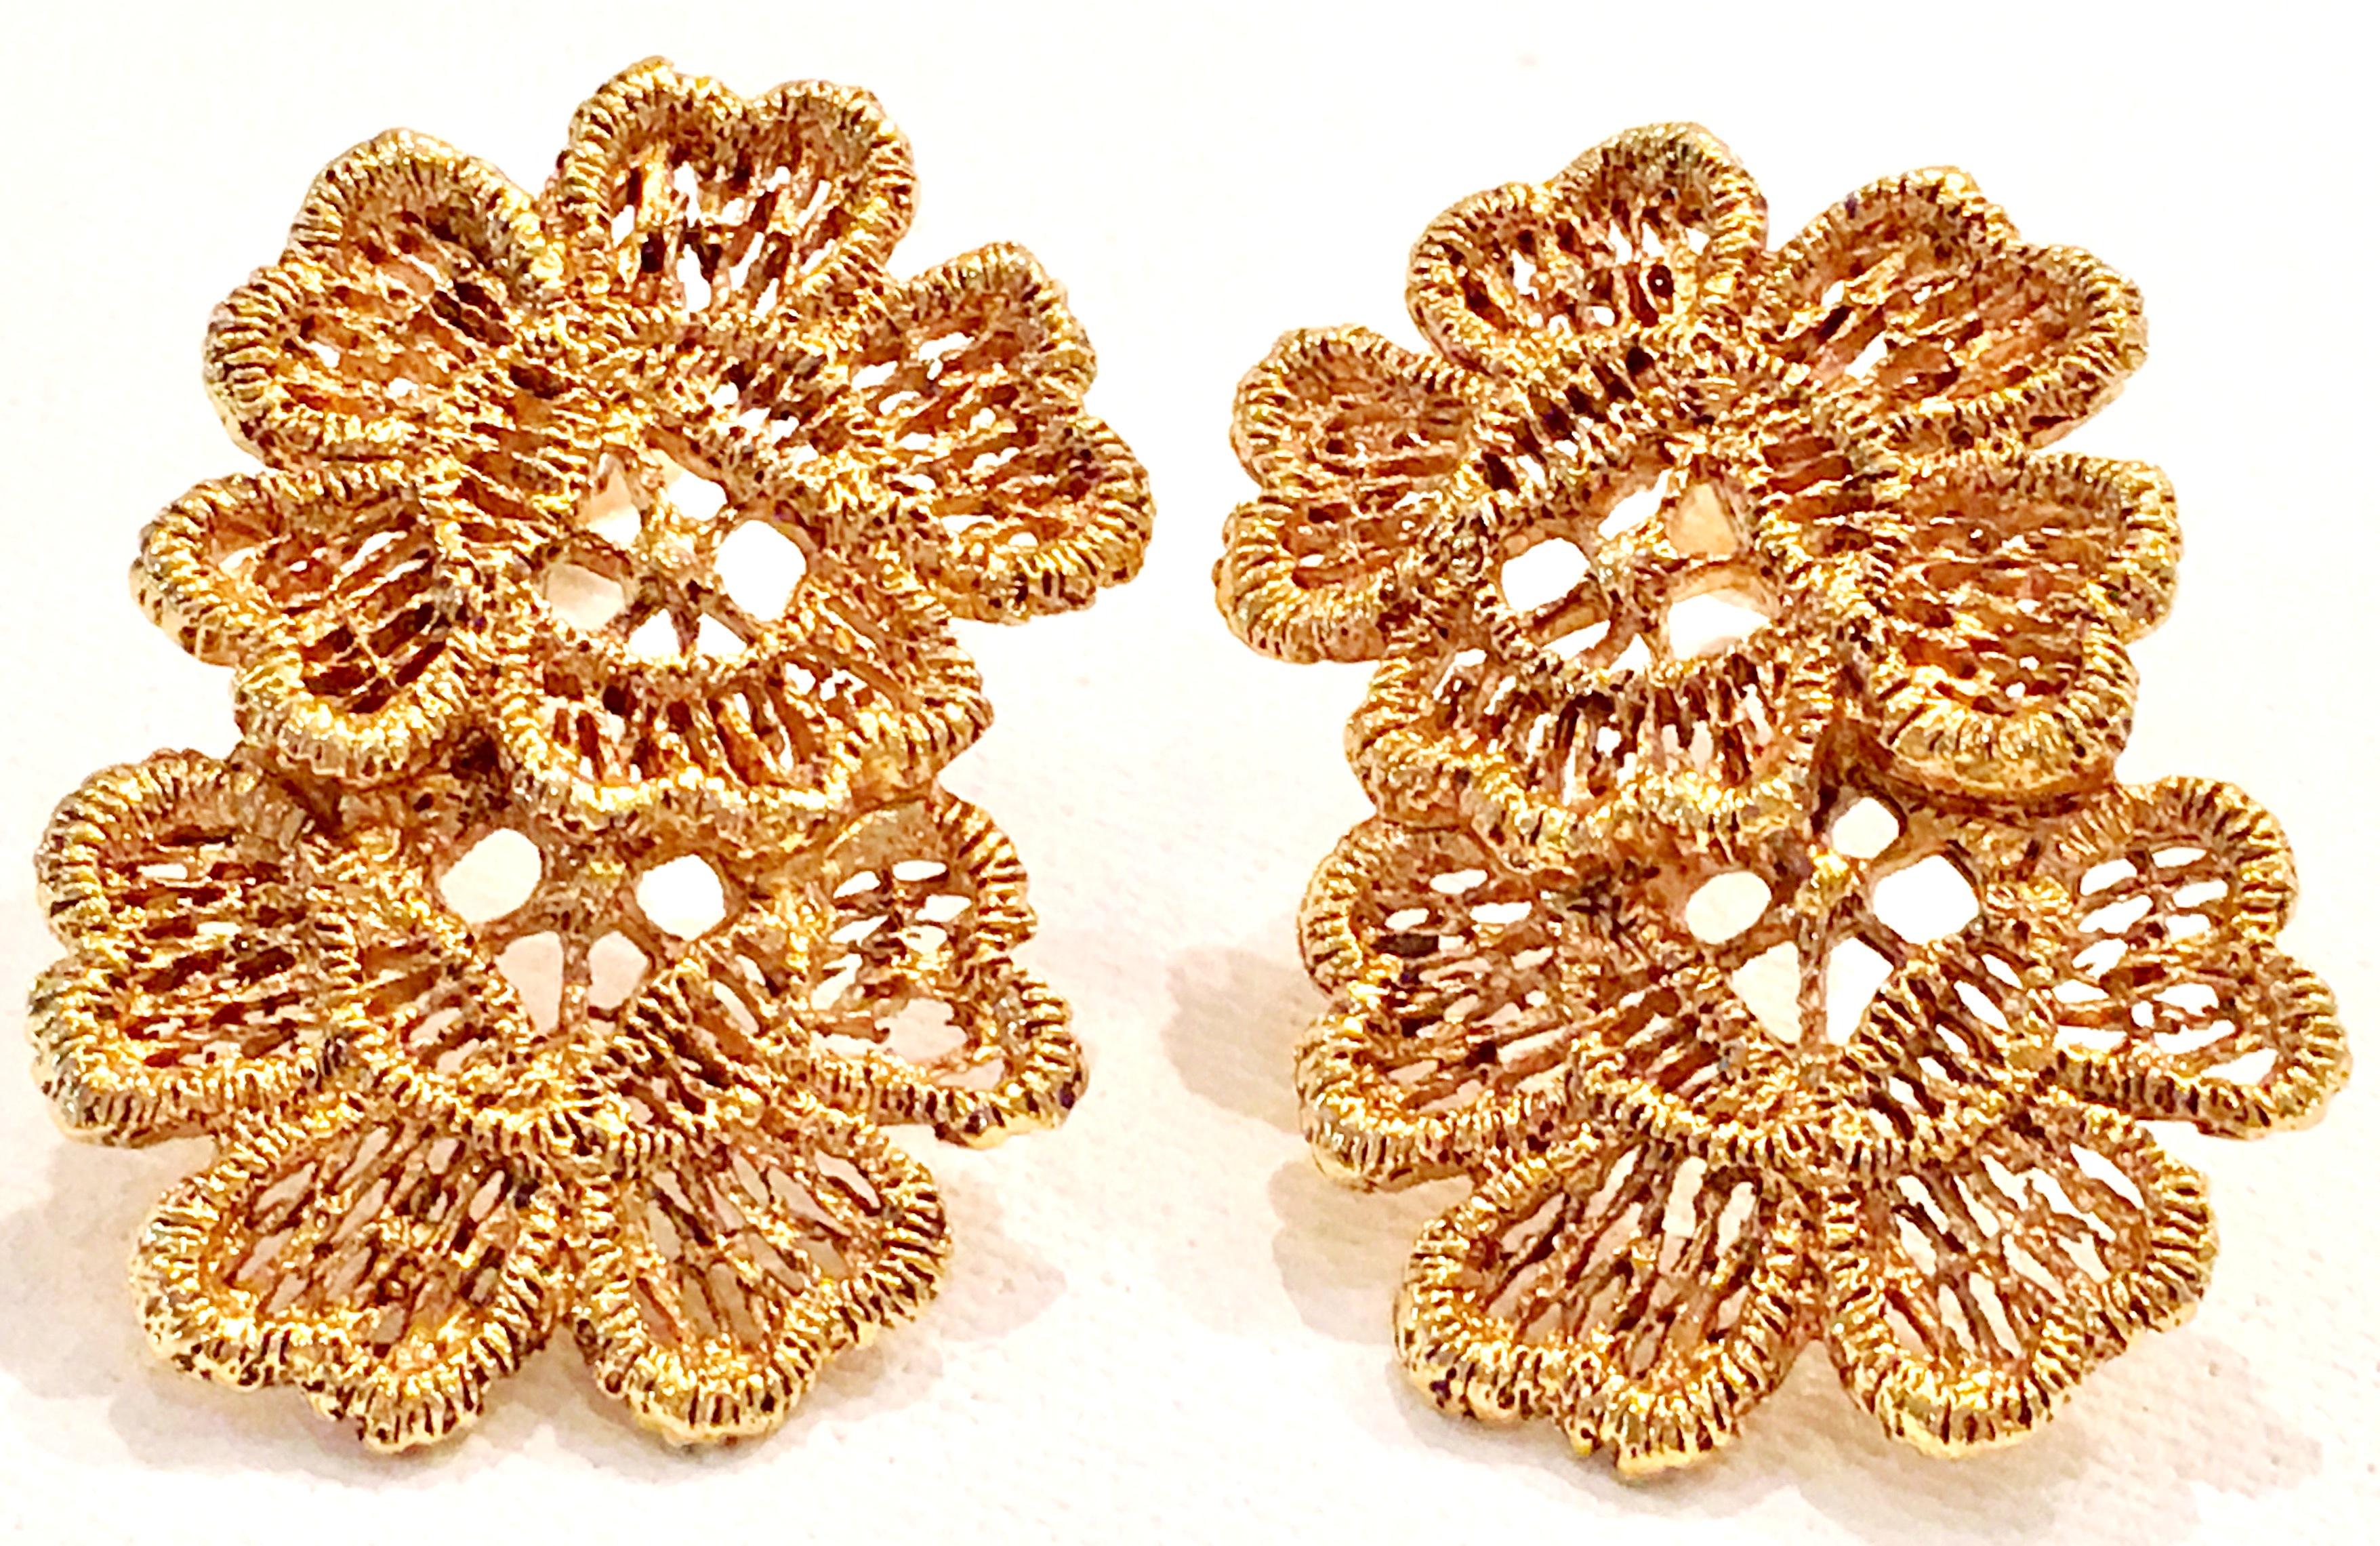 70'S Gold Plate Organic Abstract Double Flower Form Earrings By, Carol Dauplaise.
These clip style earrings are signed on the underside, Dauplaise.